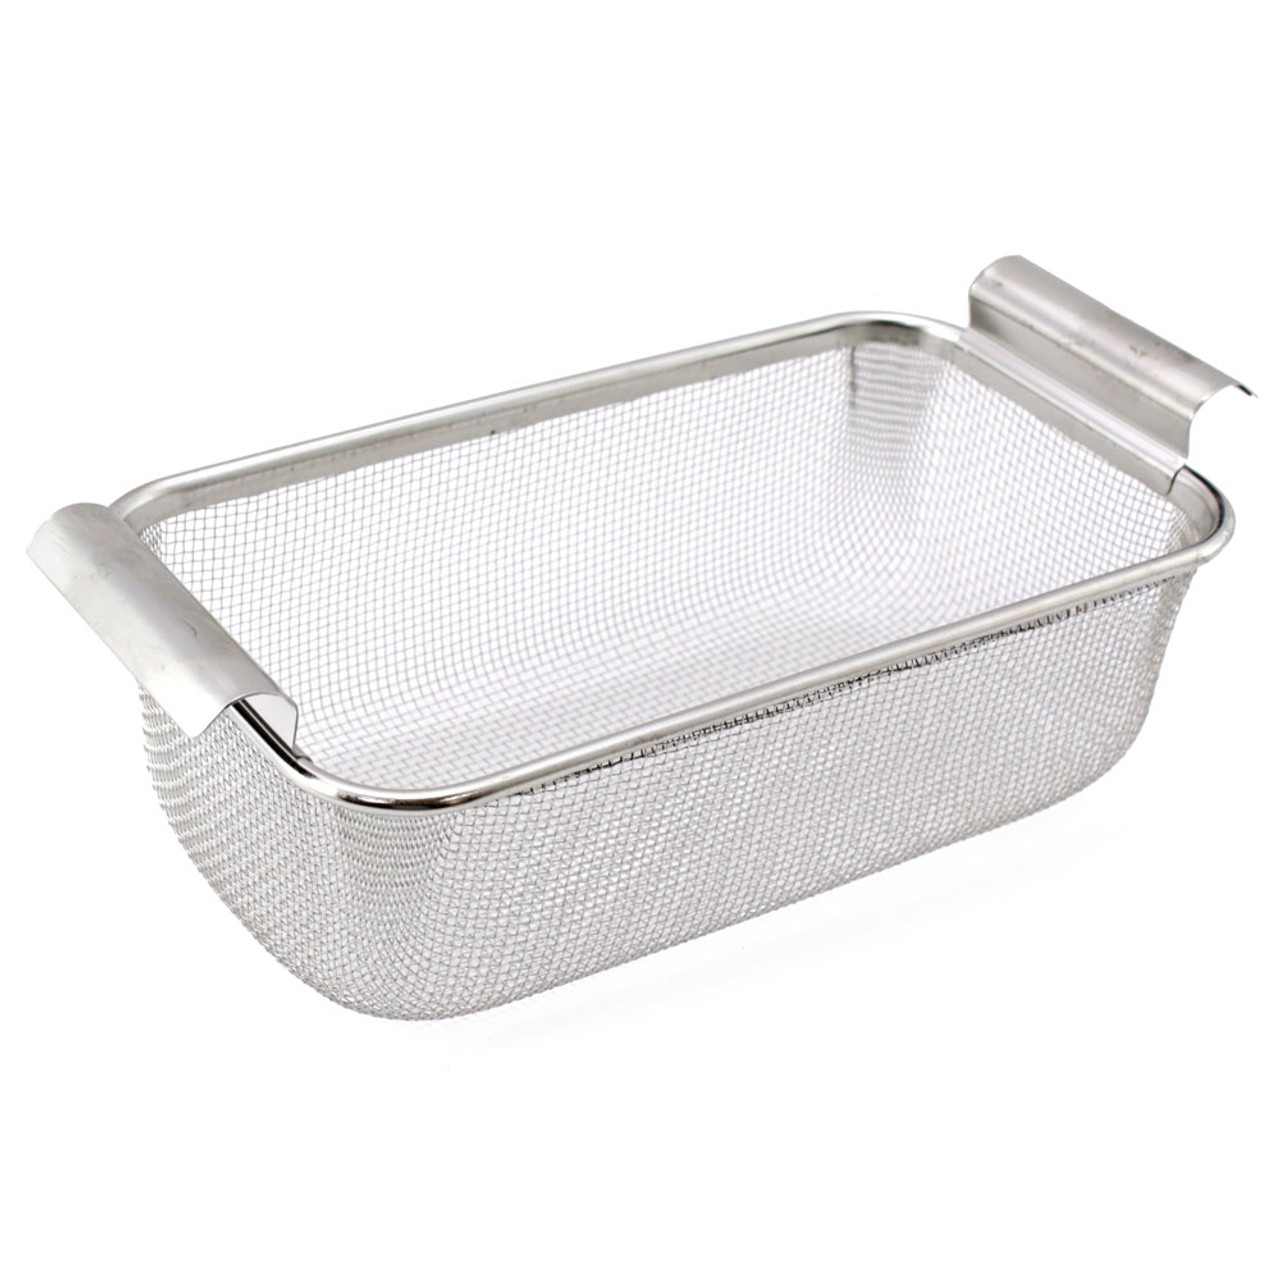 Stainless Steel Ultrasonic Cleaner Mesh Basket fits Gemoro 3 qt .75 gallon  Ultrasonic and Many Others